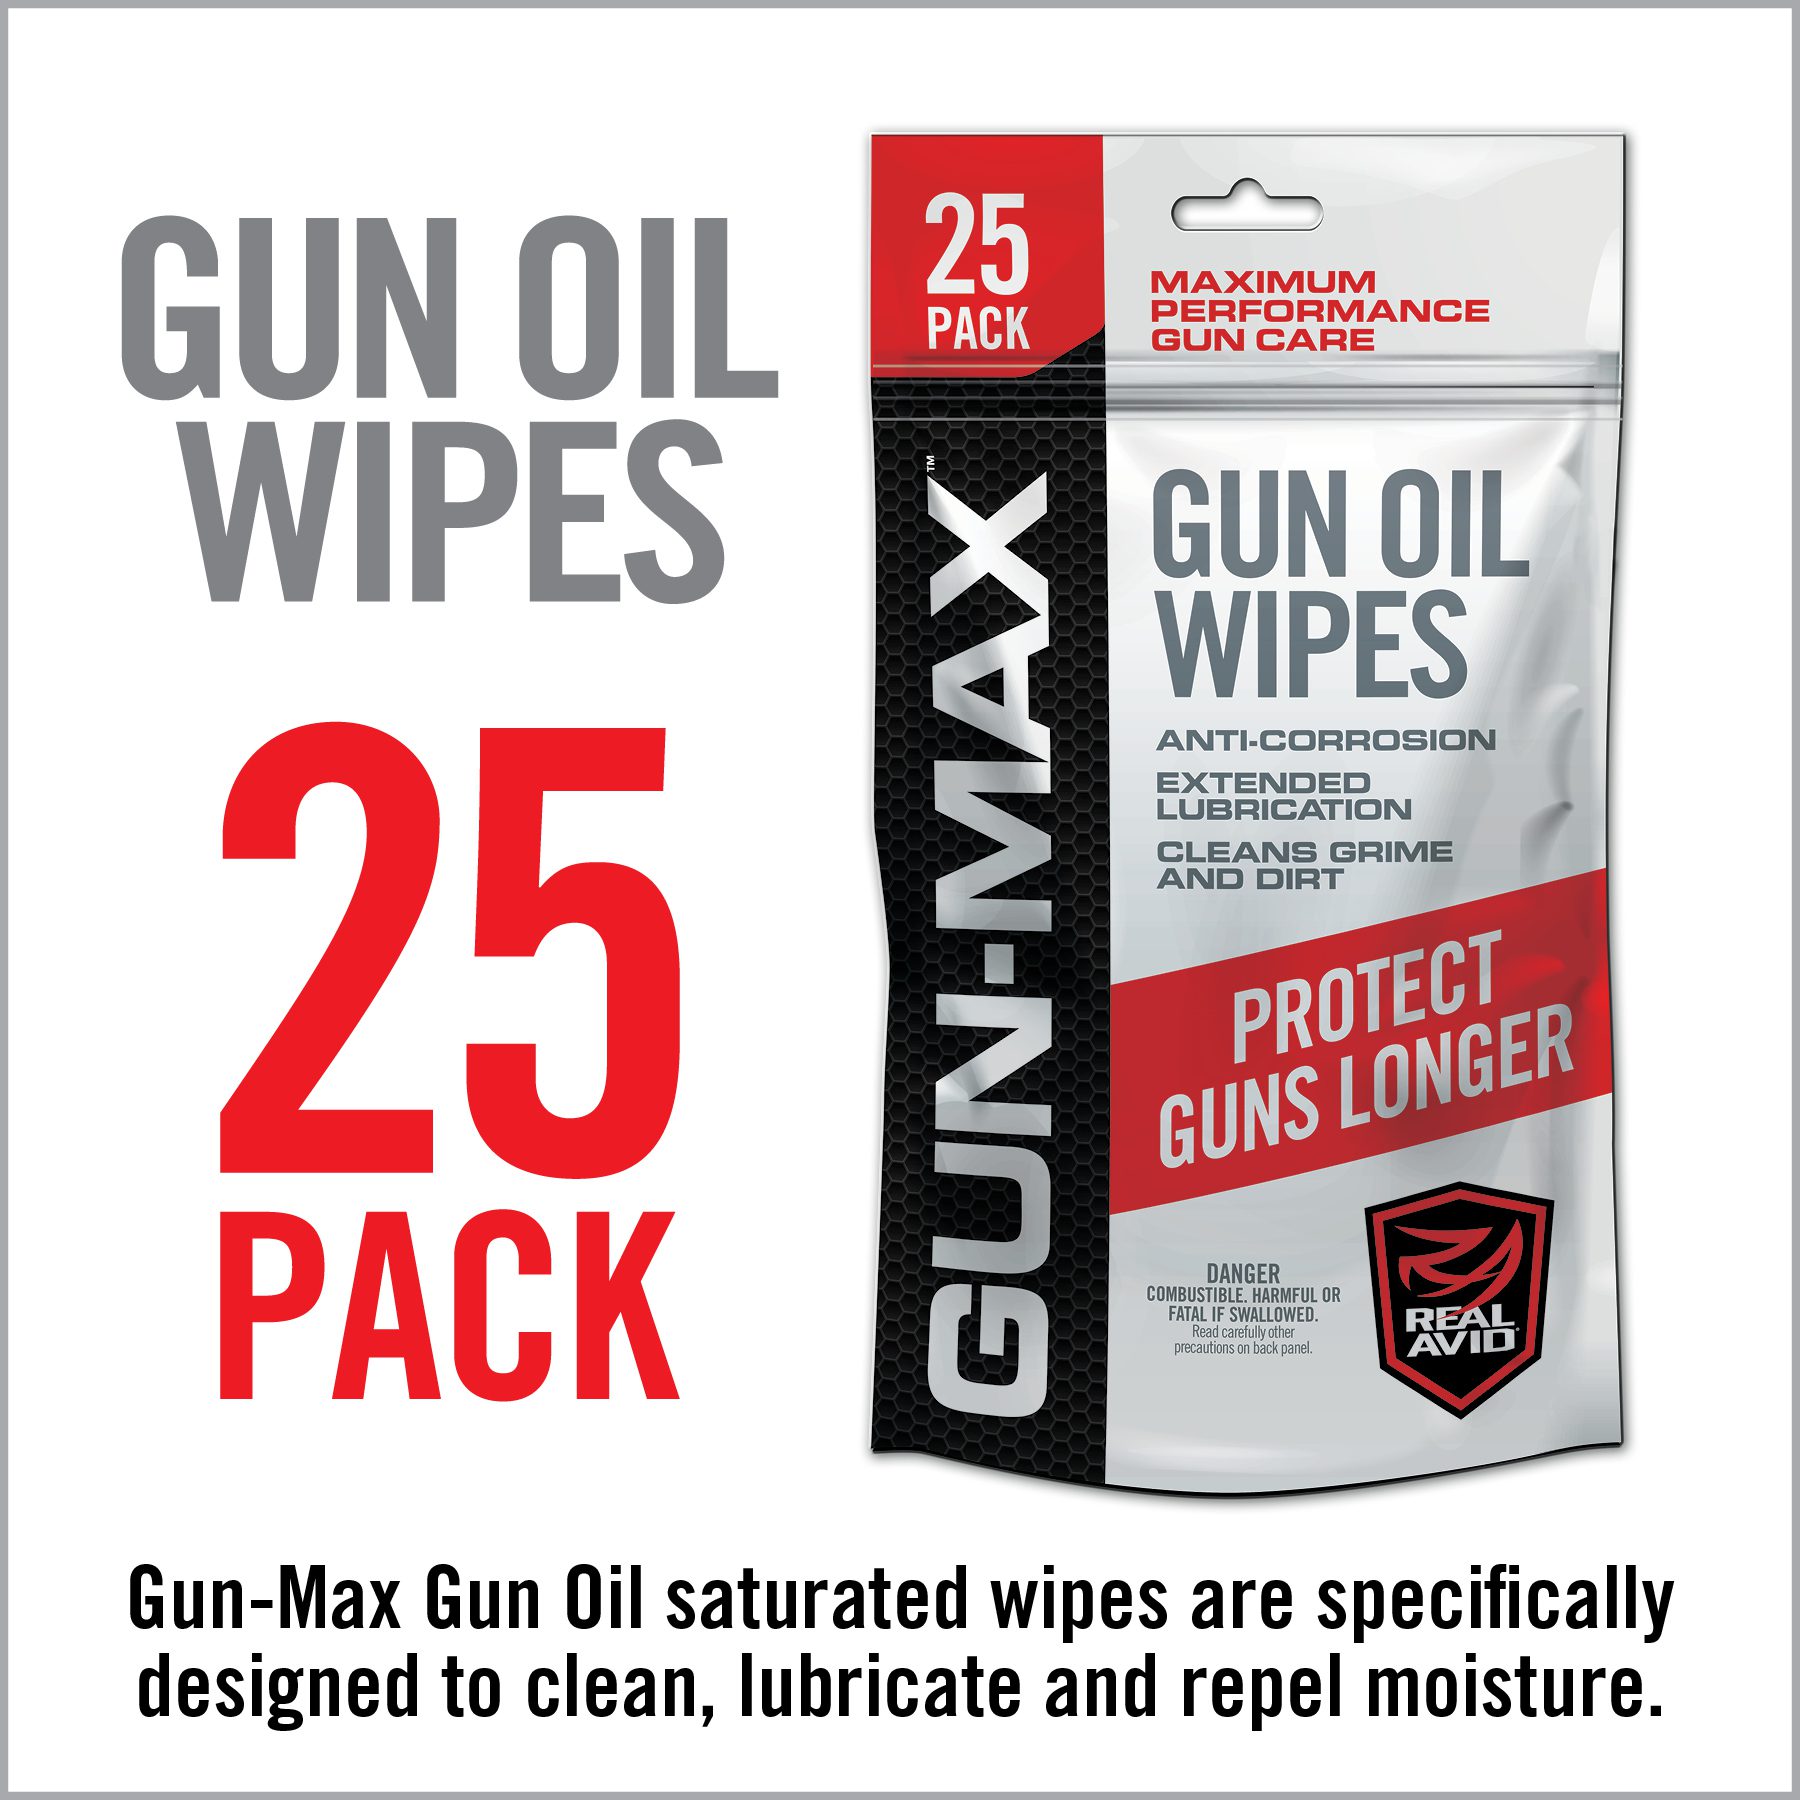 gun oil wipes are the best way to protect guns